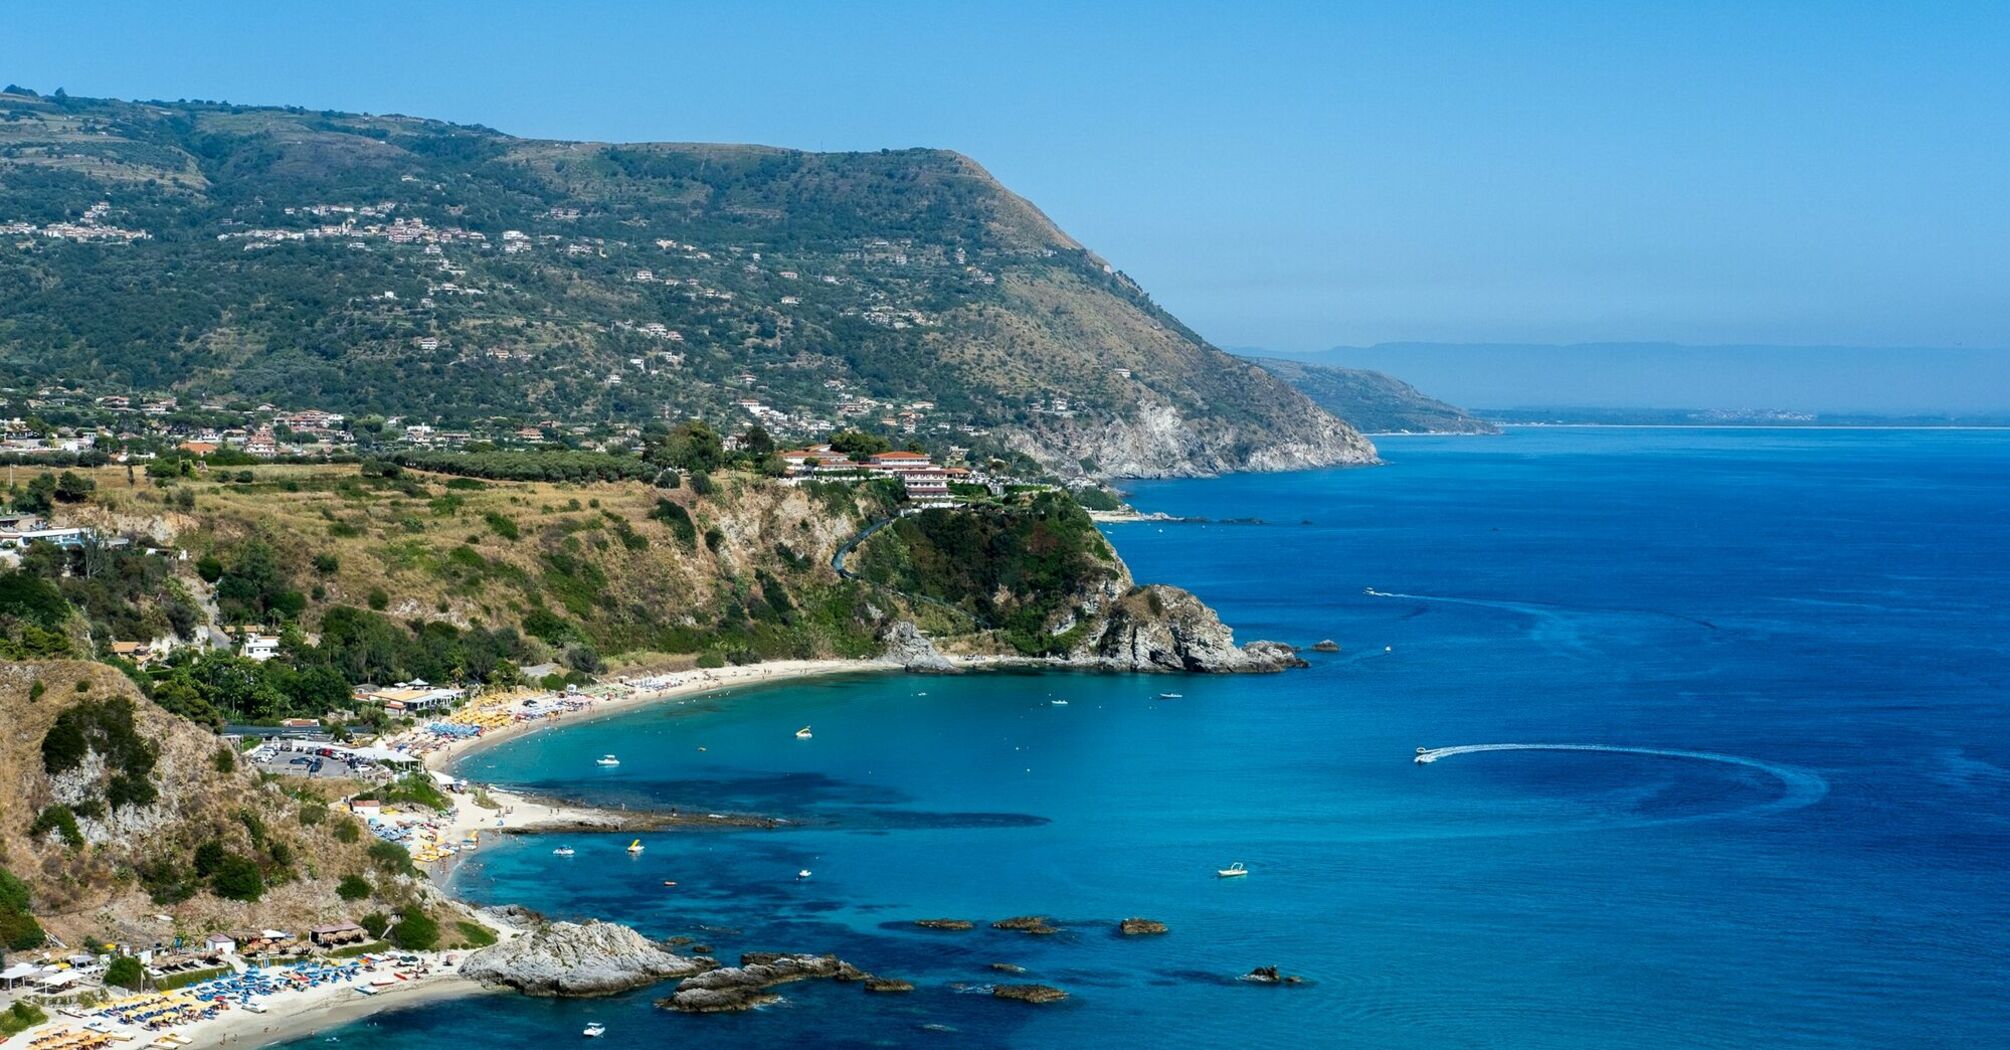 Calabria coastline with clear blue waters and beaches